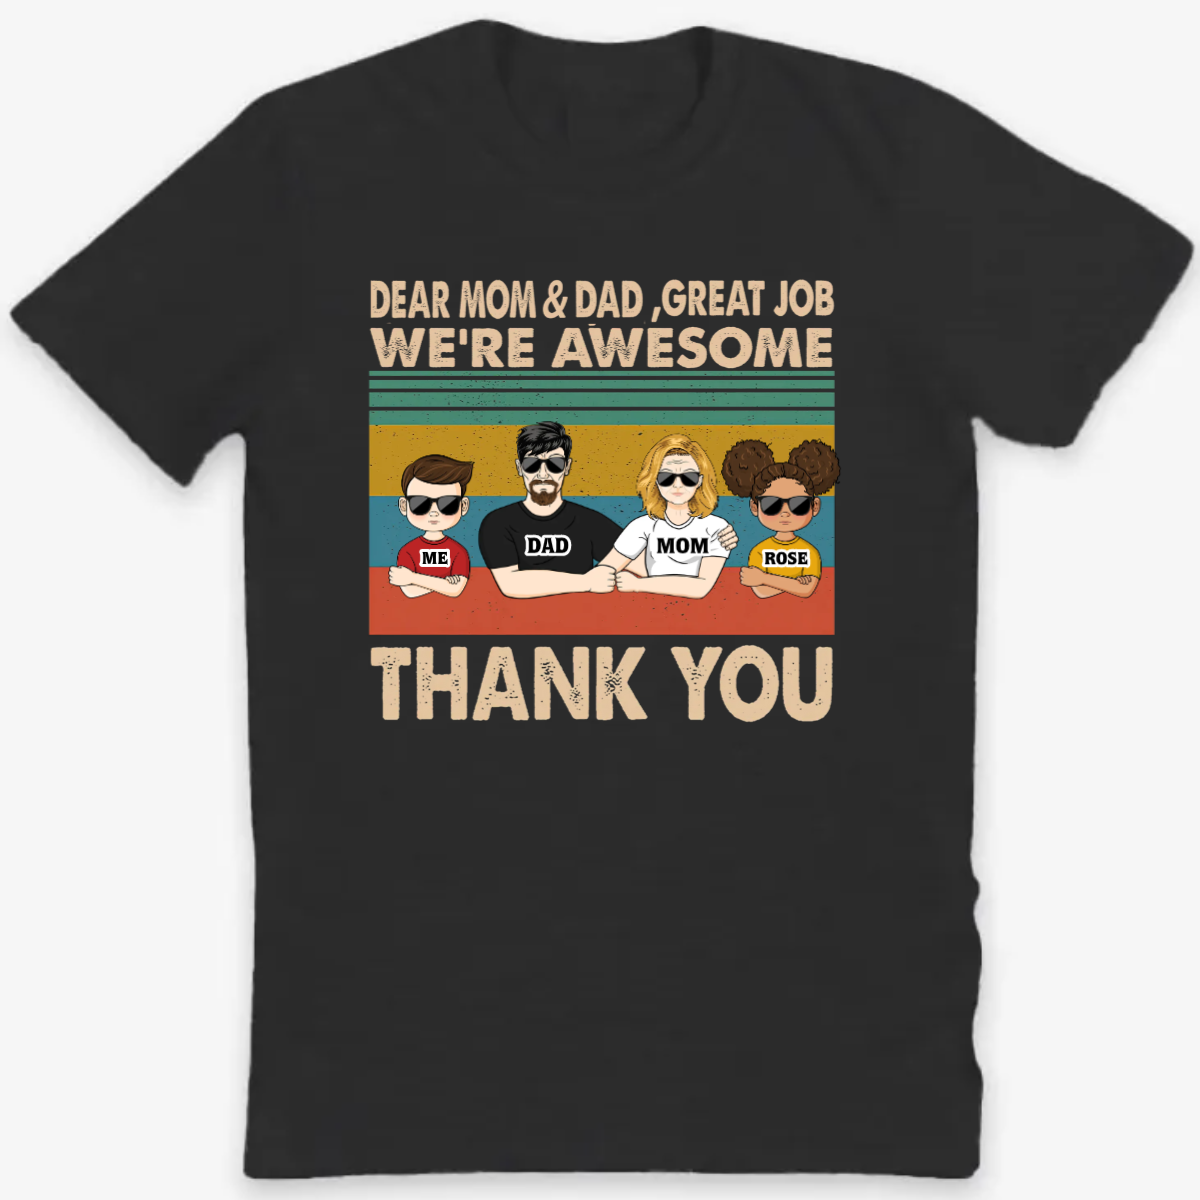 Dear Dad & Mom Great Job - We're Awesome - Personalized Gift For Parents